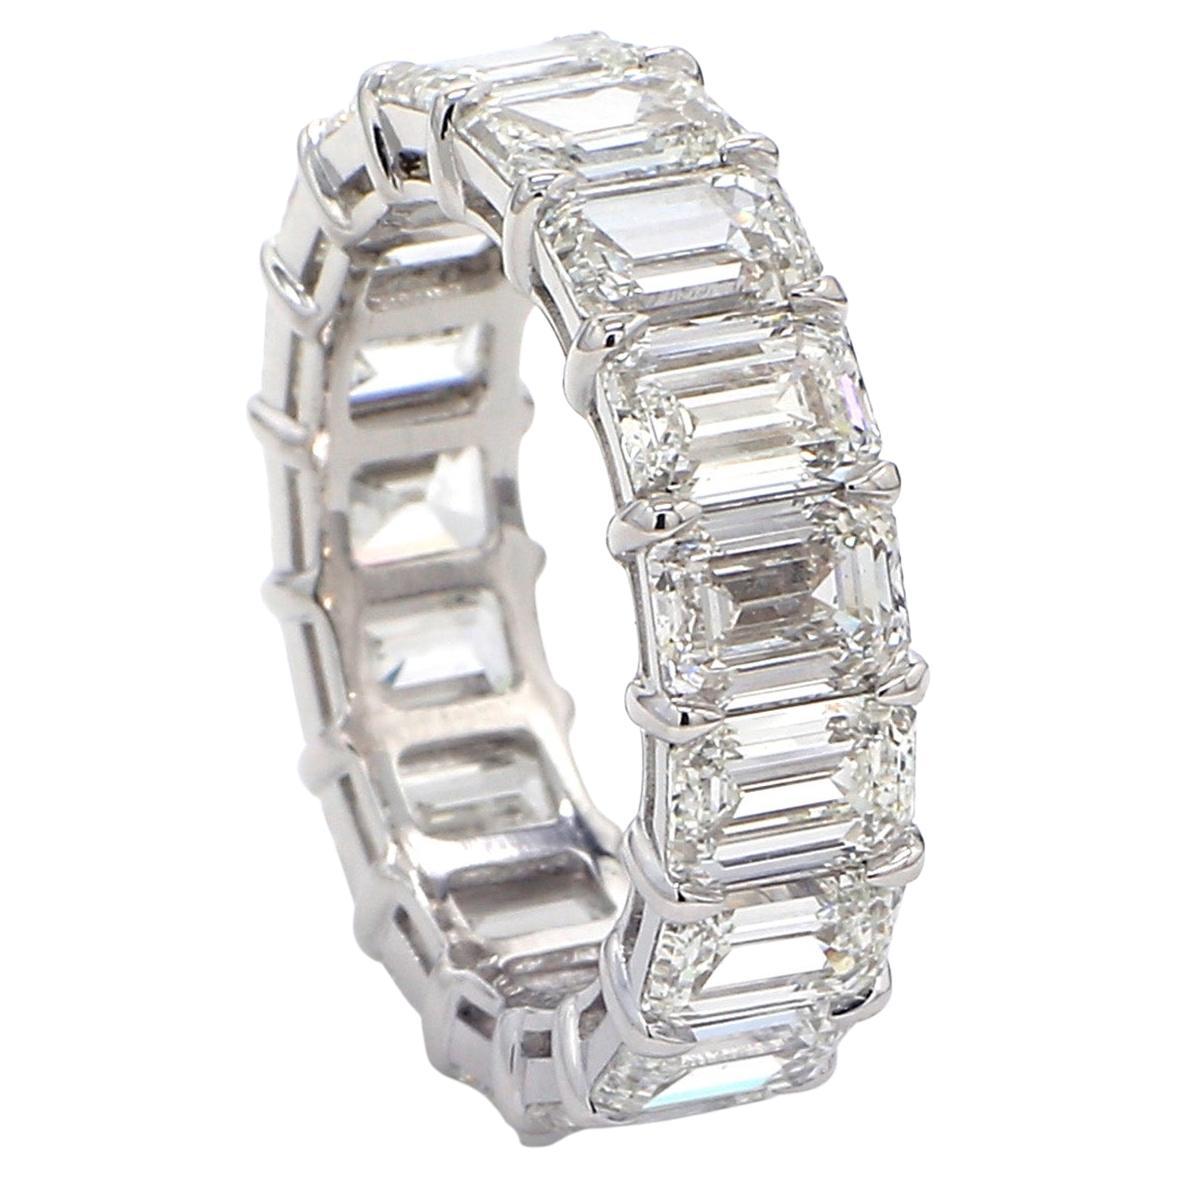 Eternity Band in Platinum with GIA G-H/VVS2-VS2 Emerald Cut Diamonds. D8.57ct.